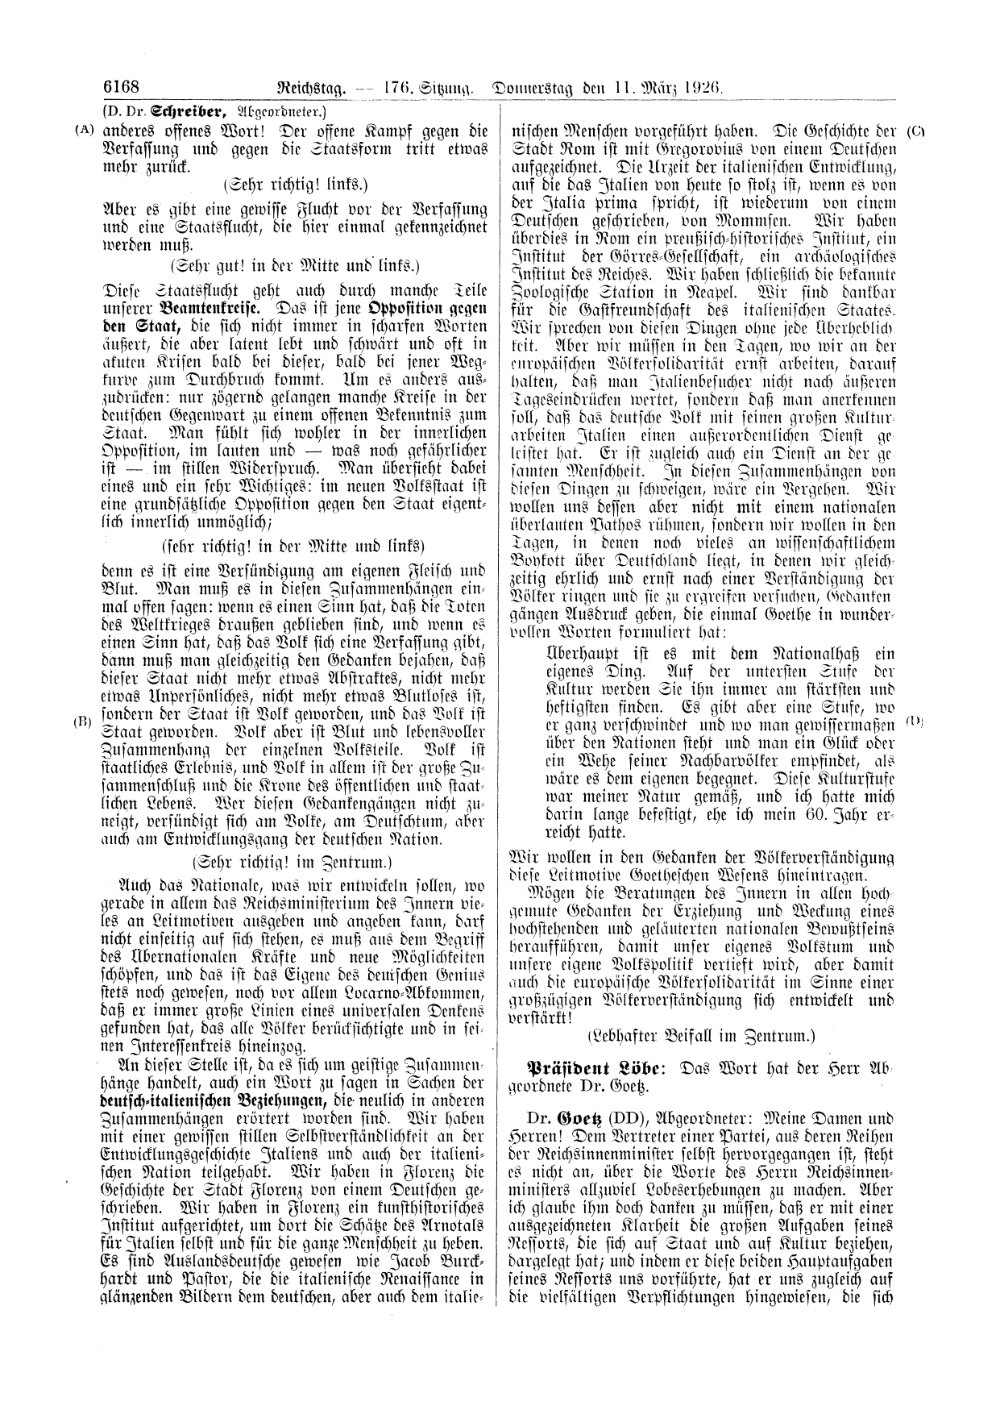 Scan of page 6168